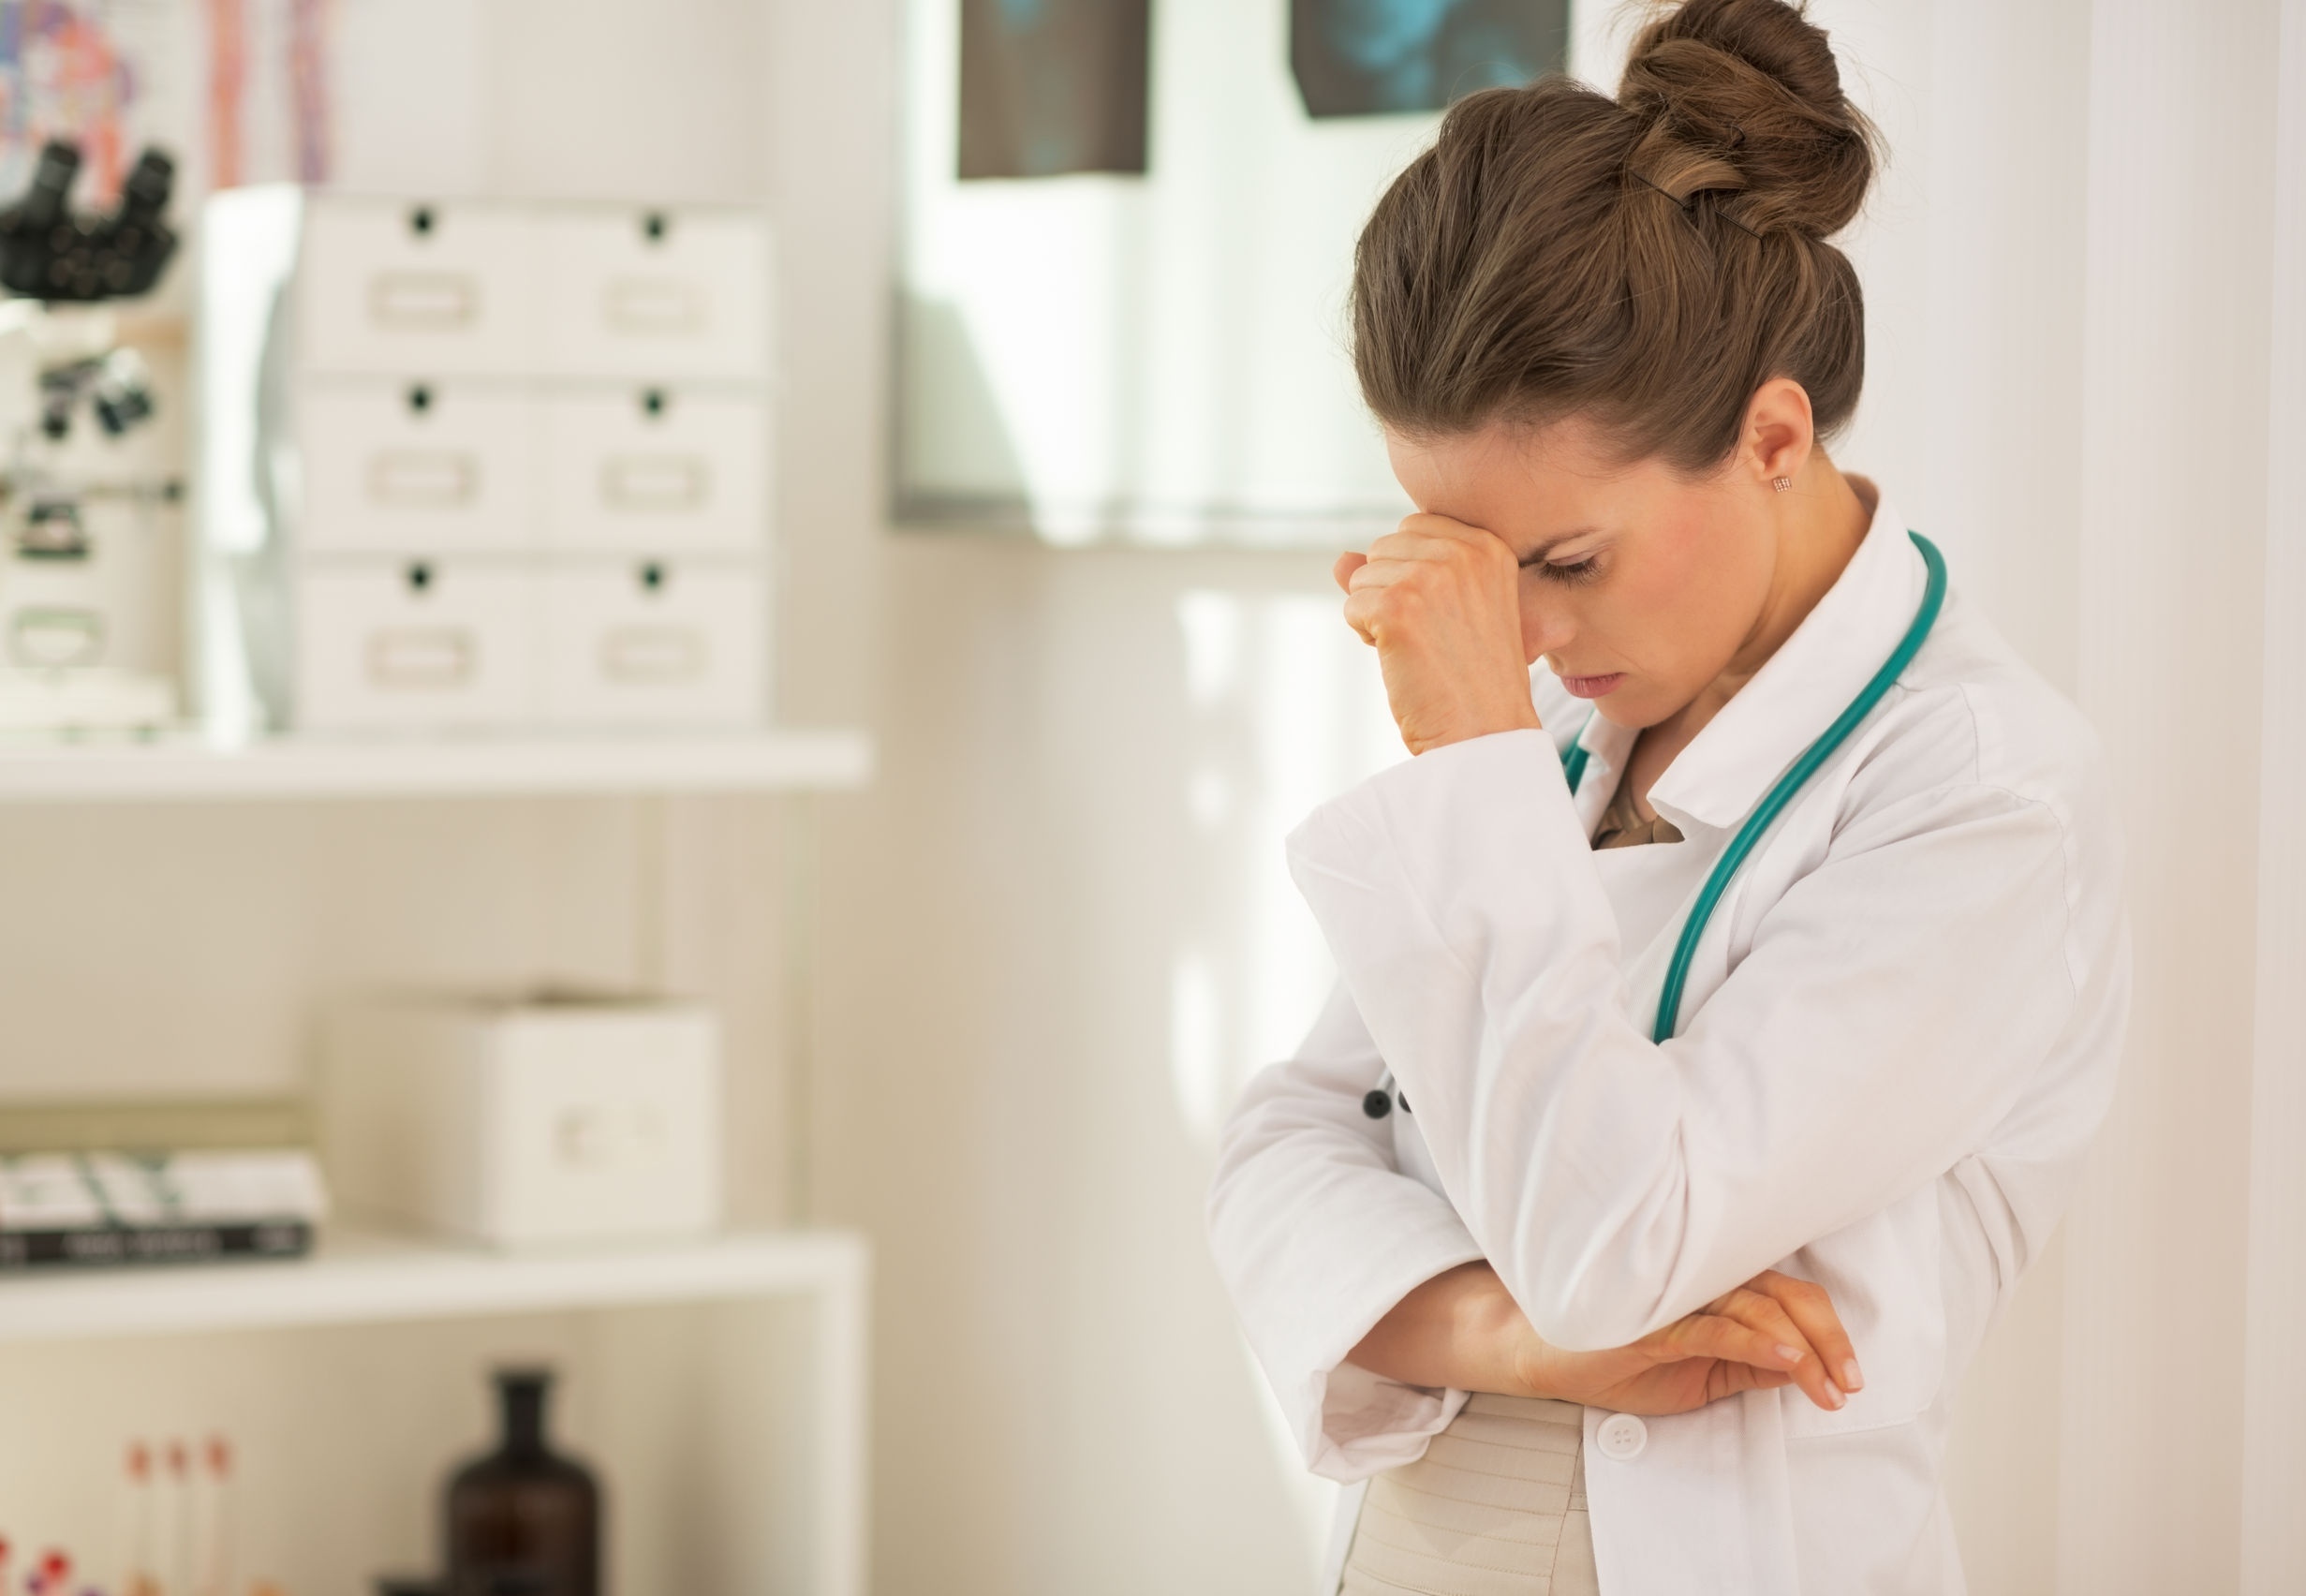 strategies for preventing physician suicide